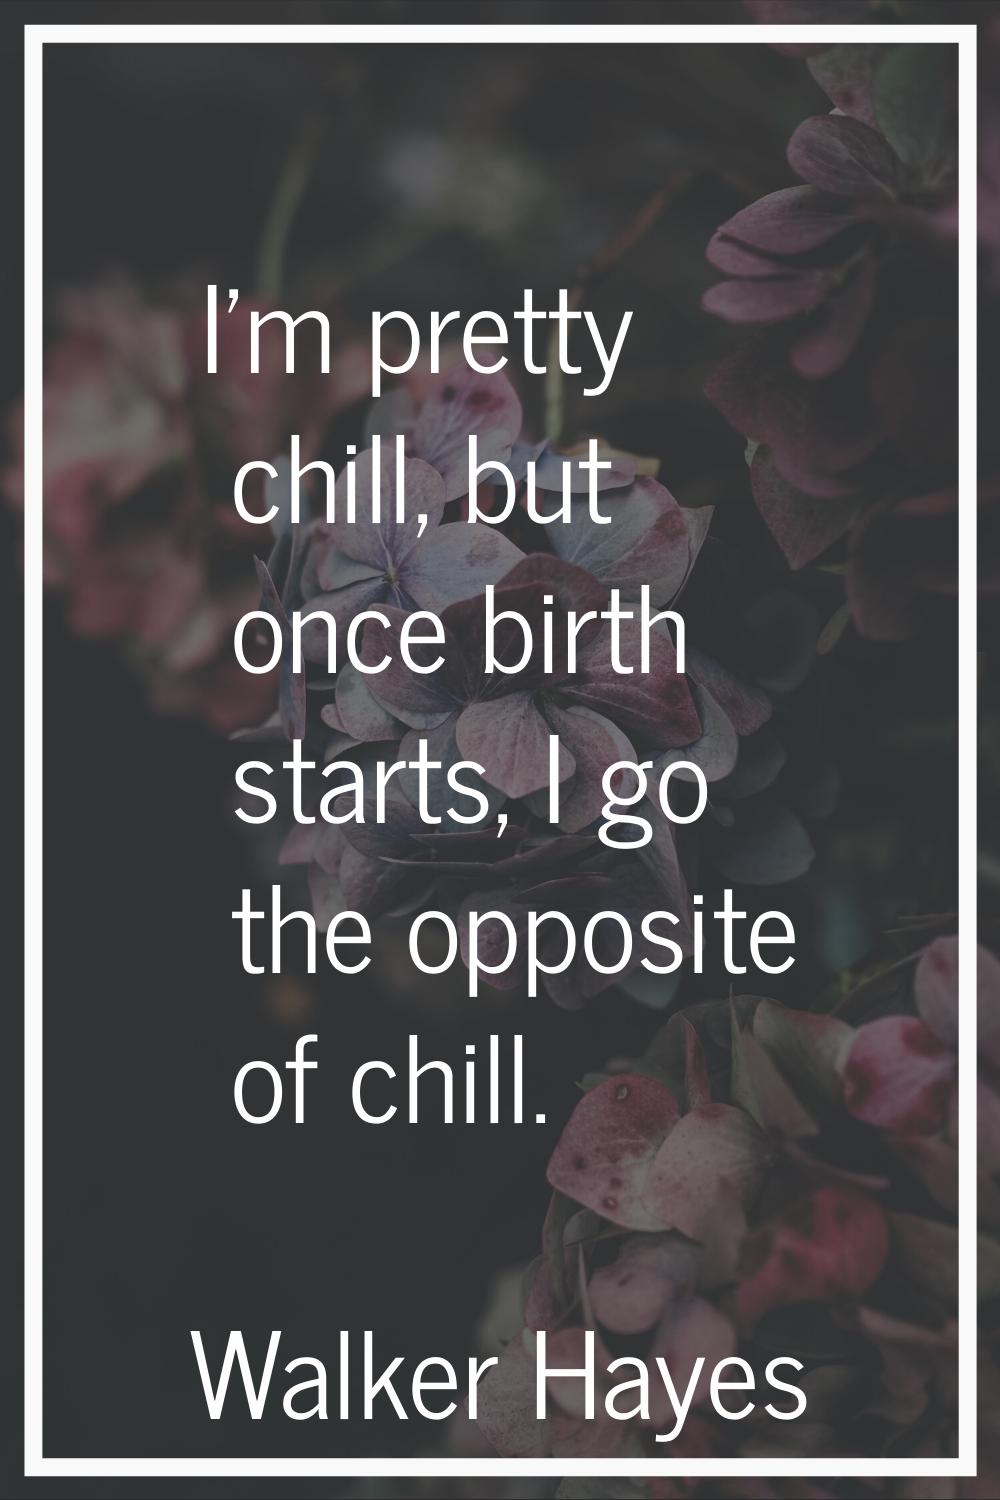 I'm pretty chill, but once birth starts, I go the opposite of chill.